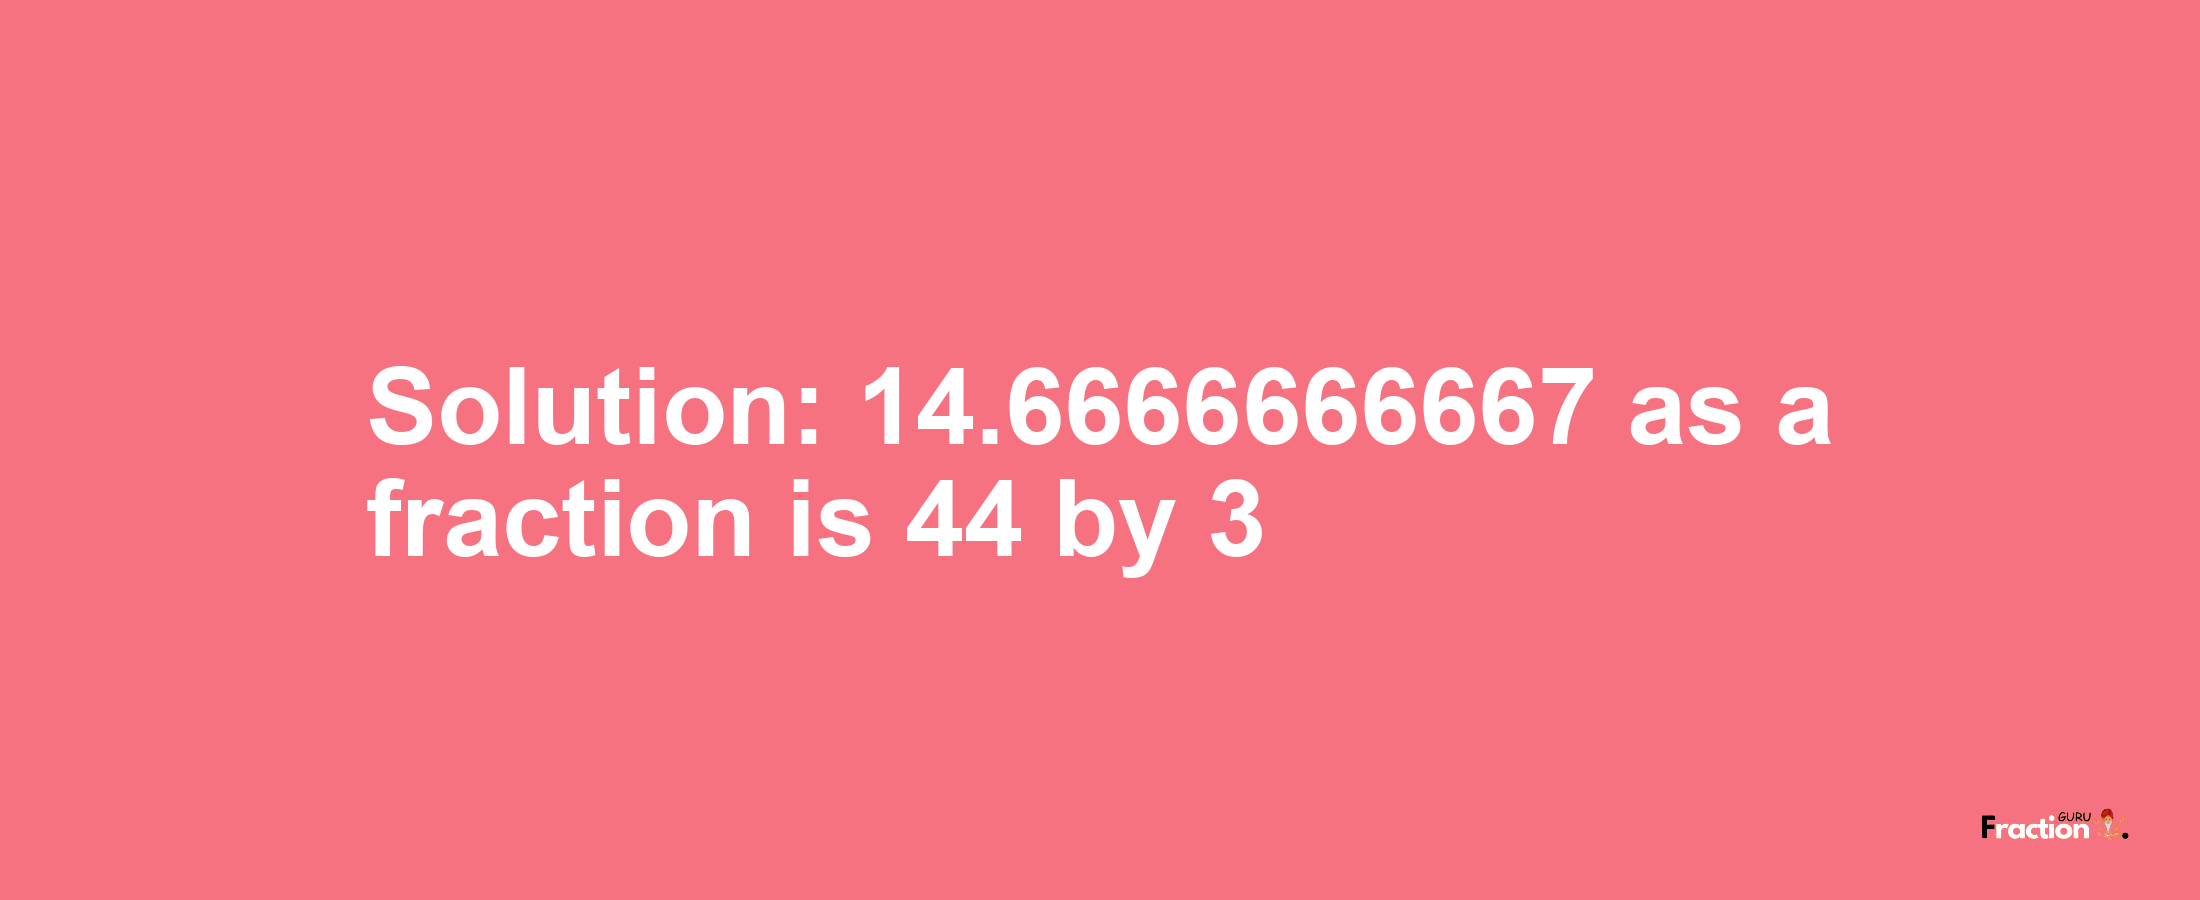 Solution:14.6666666667 as a fraction is 44/3